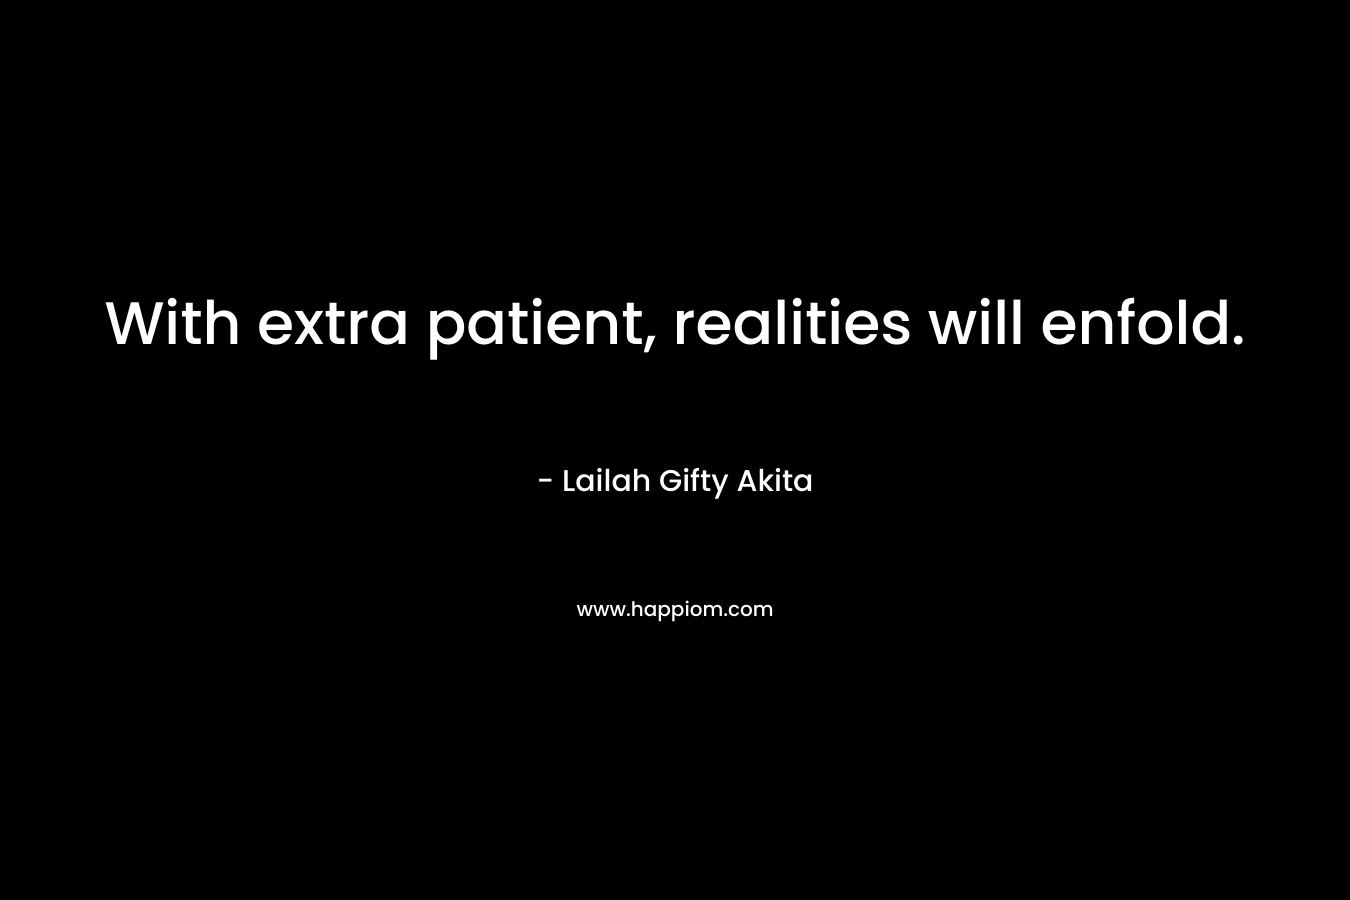 With extra patient, realities will enfold.